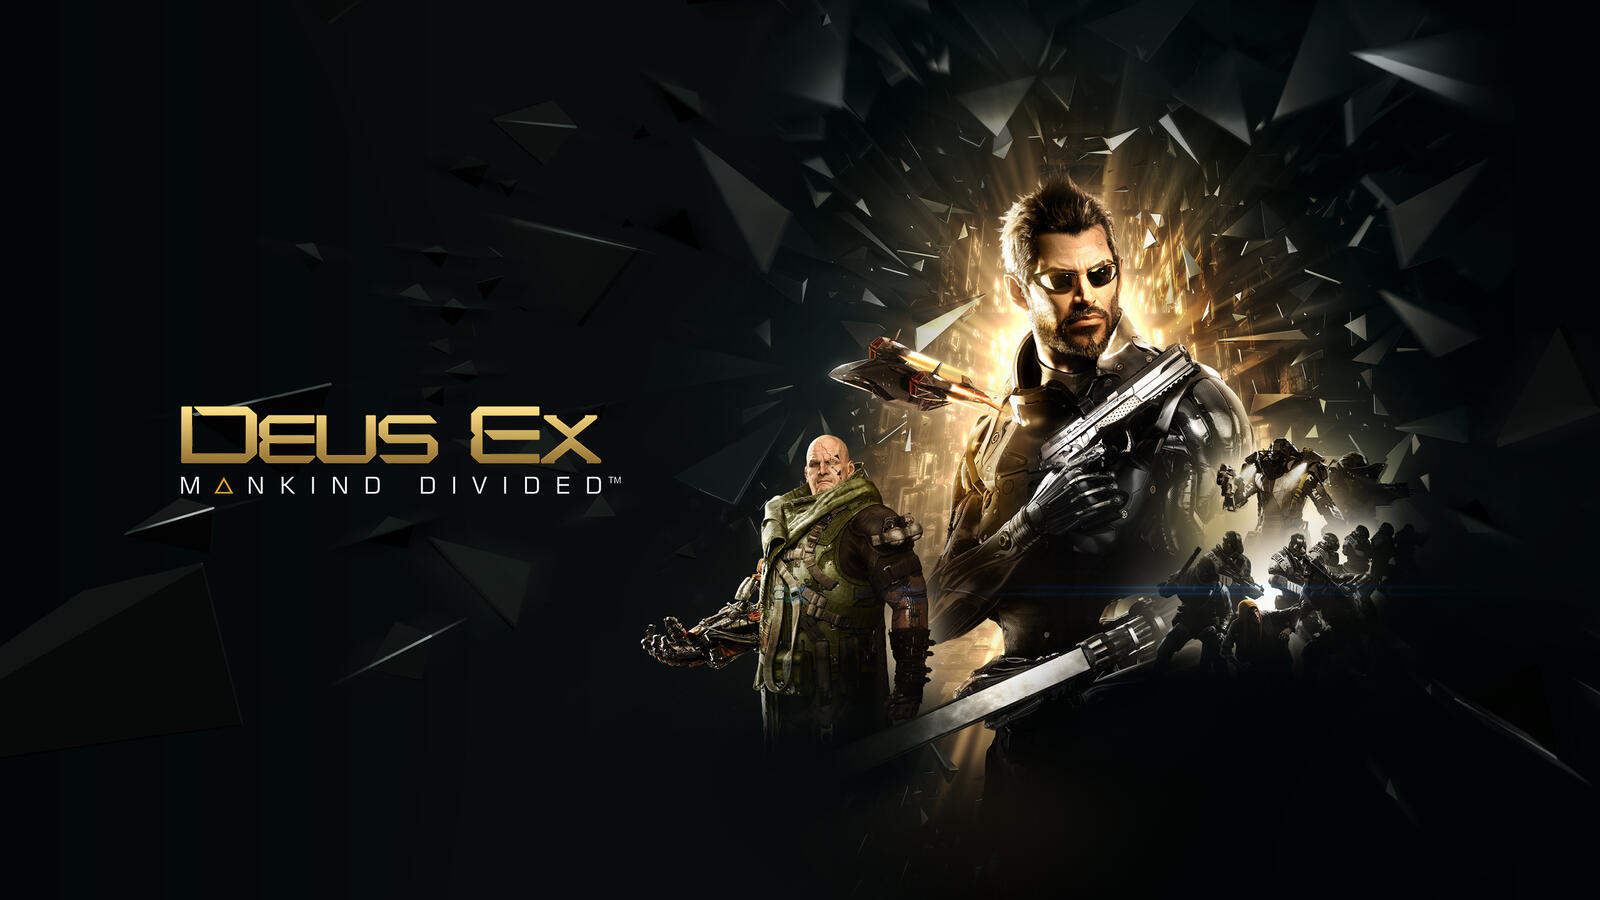 Wallpapers Deus Ex: Mankind Divided computer games screen saver on the desktop